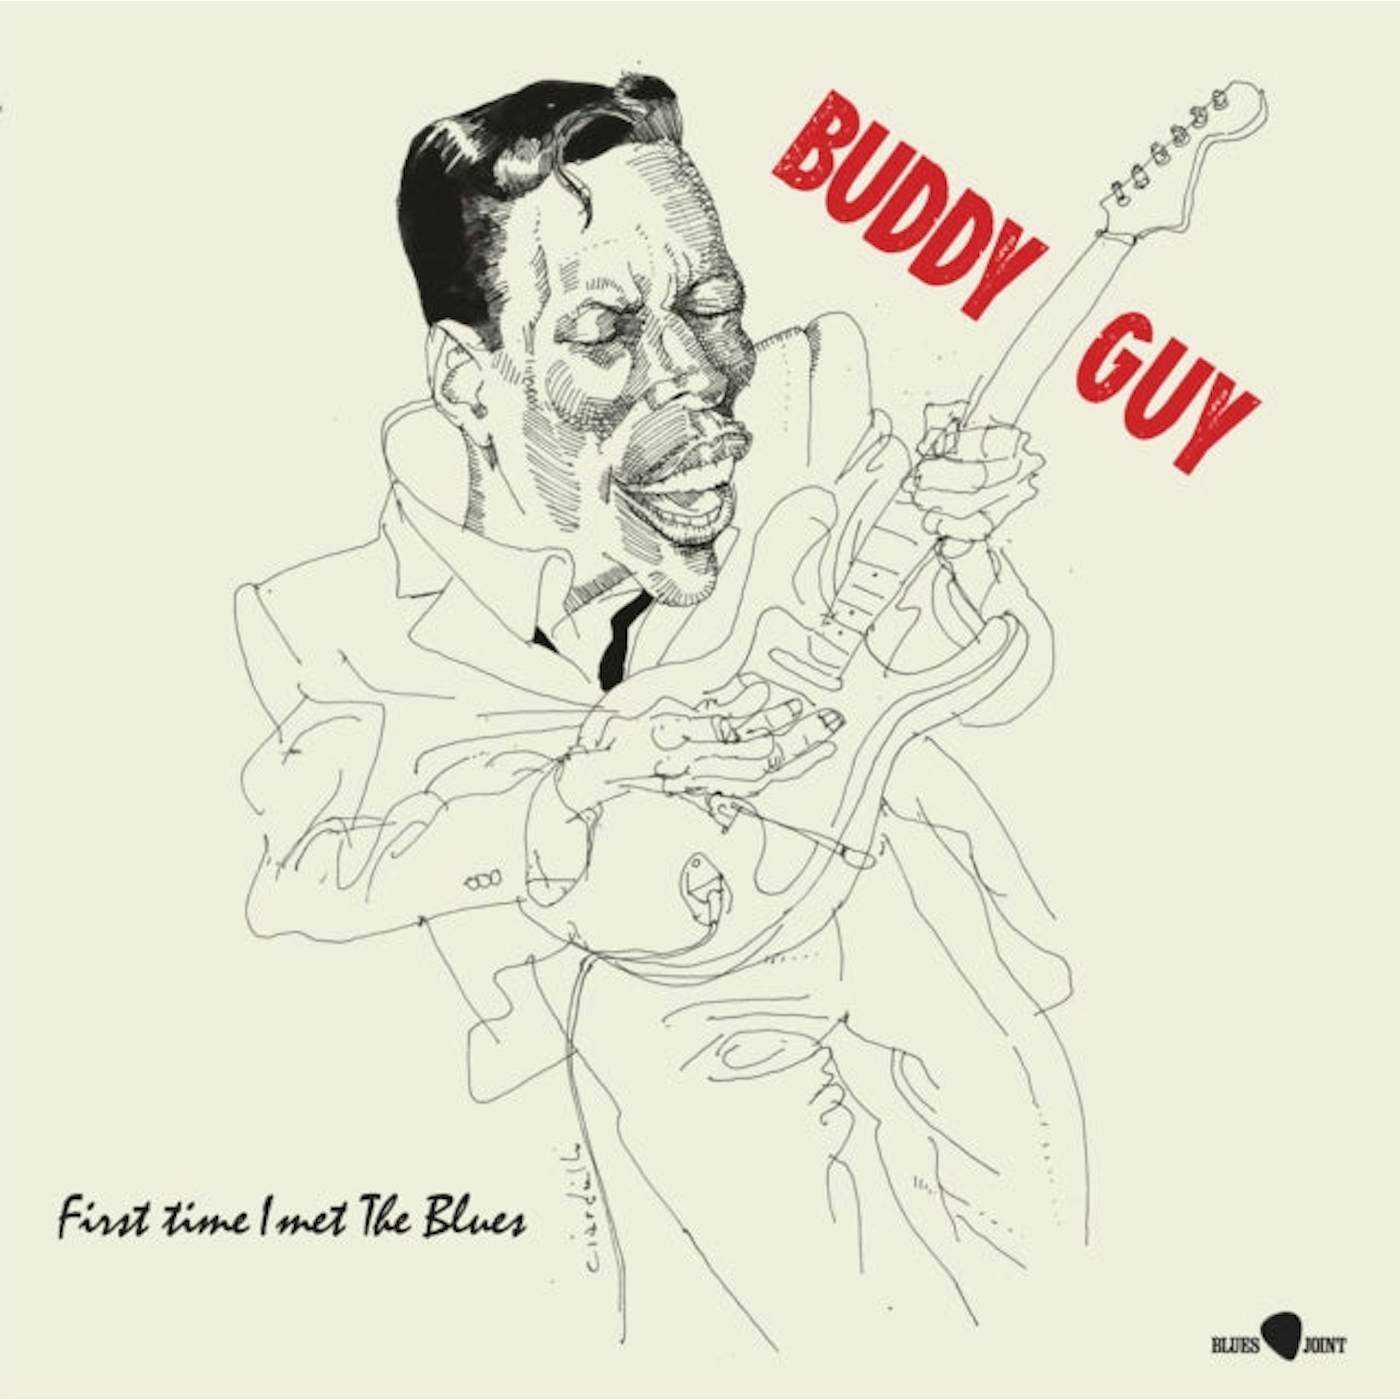 Buddy Guy LP - First Time I Met The Blues (Limited Edition) (Vinyl)